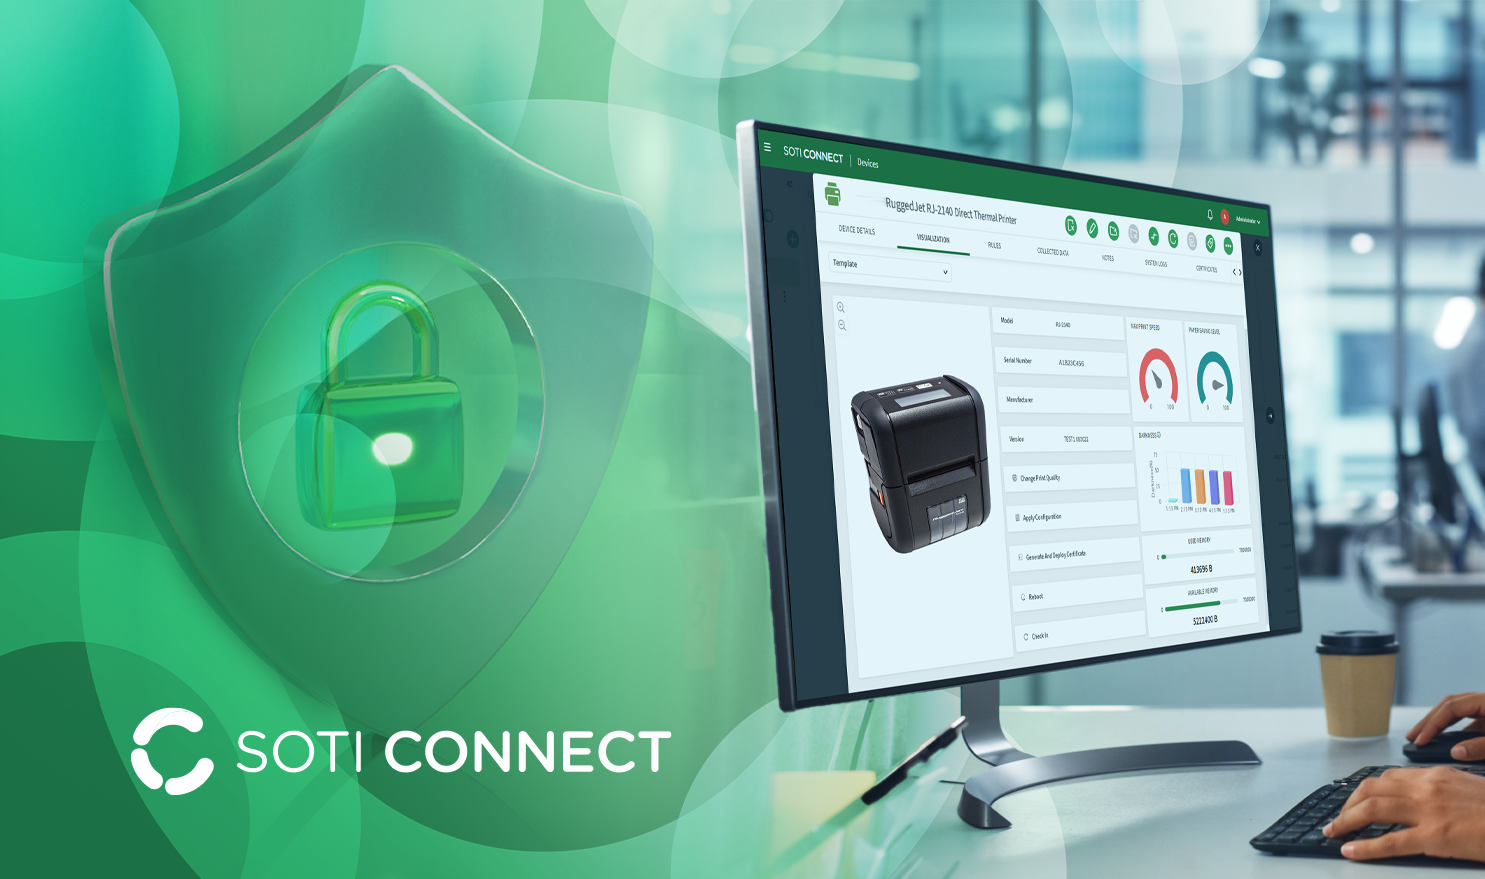 Printer Security Software | Protect Your Printers | SOTI Connect